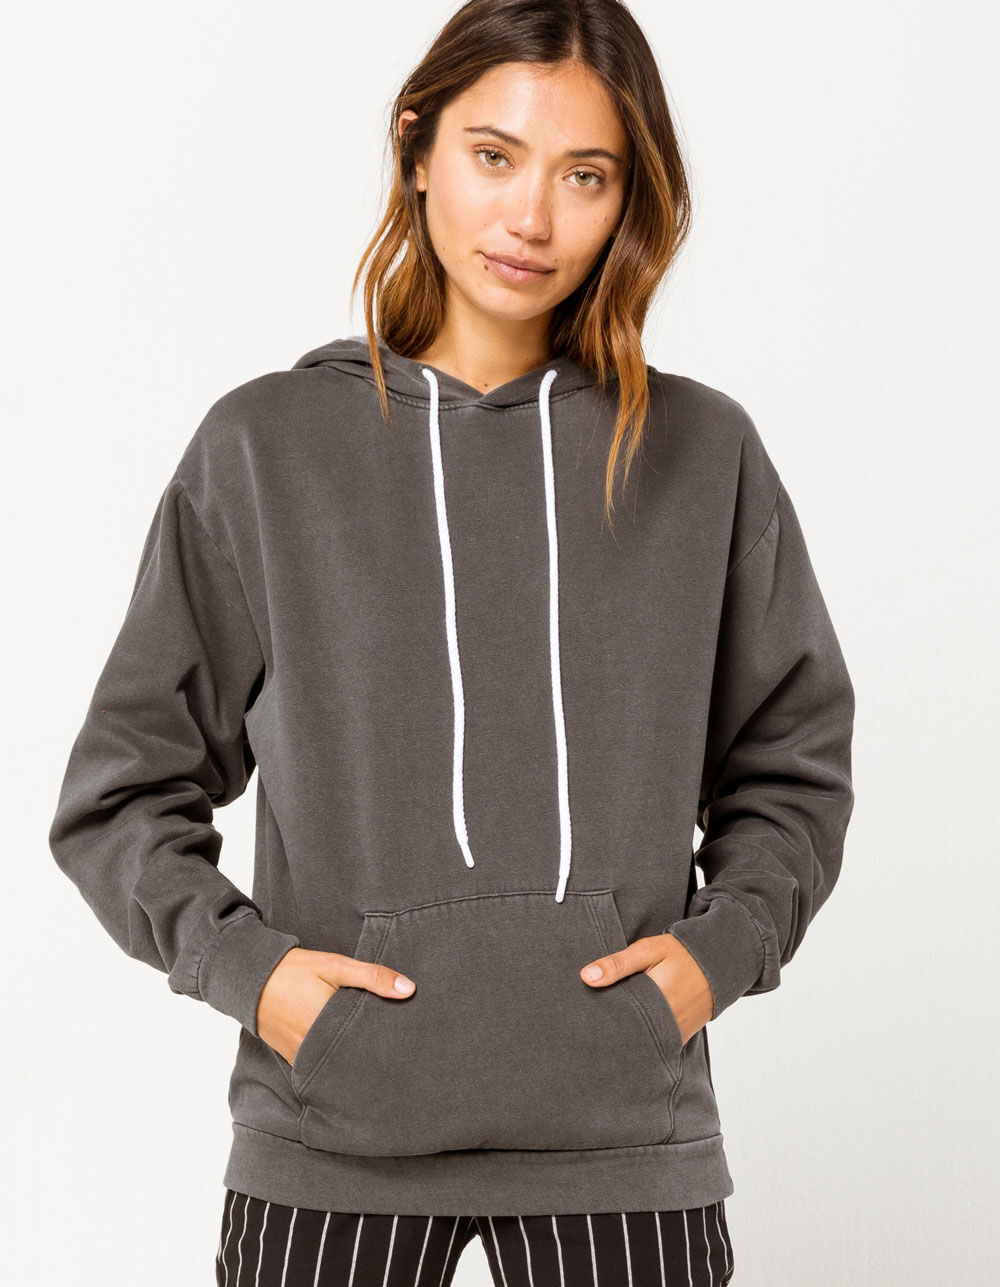 SKY AND SPARROW Mineral Womens Oversized Hoodie image number 0